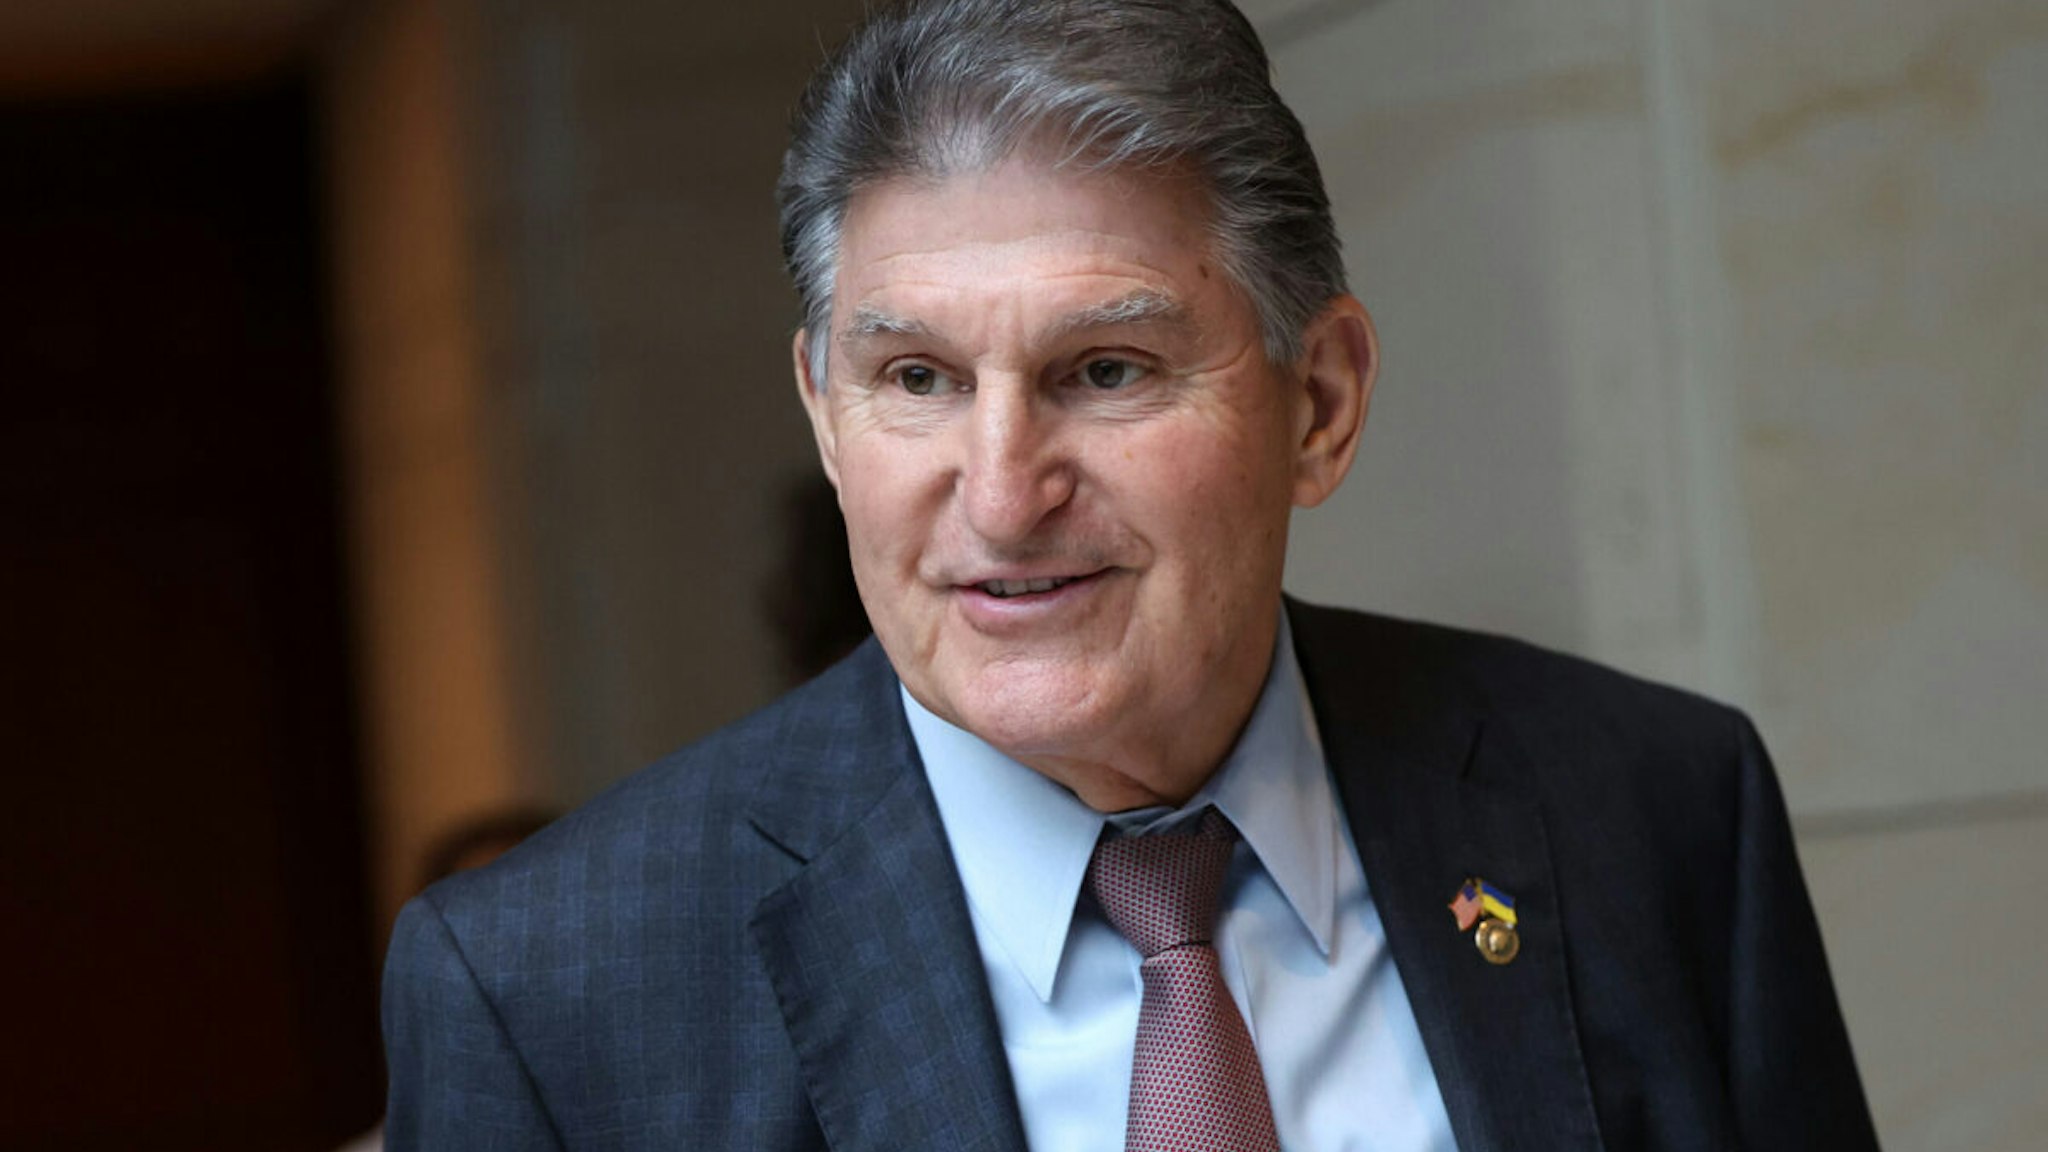 WASHINGTON, DC - FEBRUARY 15: U.S. Sen. Joe Manchin (D-WV) arrives for a Senate briefing on China at the U.S Capitol on February 15, 2023 in Washington, DC. Members of the Biden administration, including representatives from the Defense Department, briefed Senators on China and the recent suspected spy balloon that was shot down.